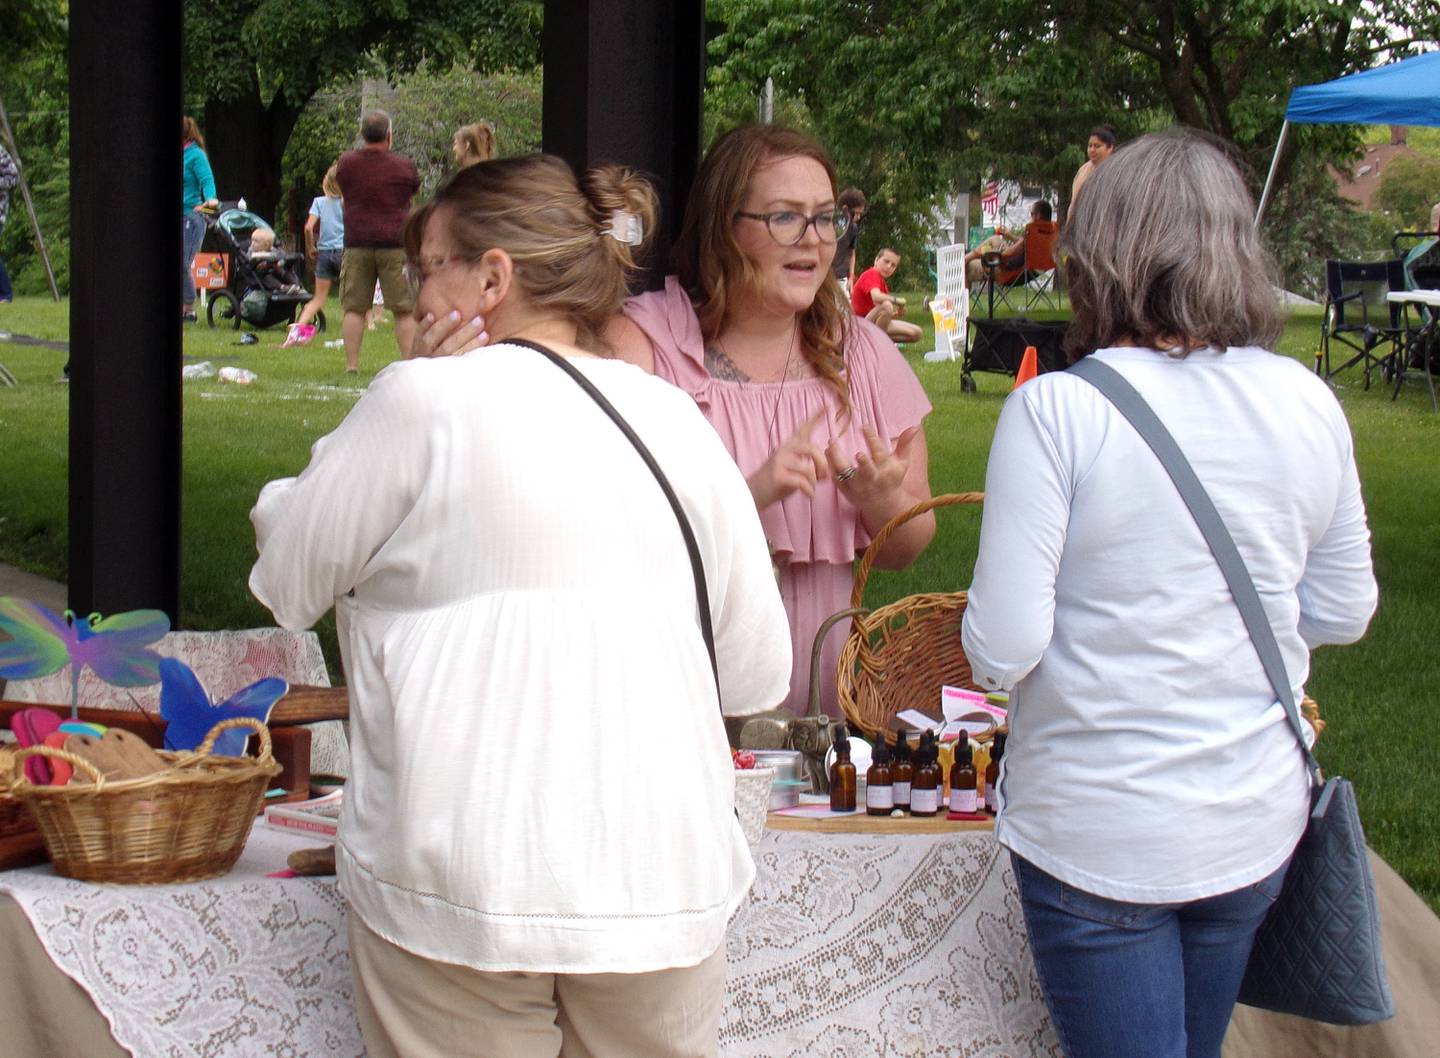 Customers ask questions at Just Ask Jasmine, an artist vendor Saturday, June 4, 2022, at the La Salle Music and Art Festival in Pulaski Park.